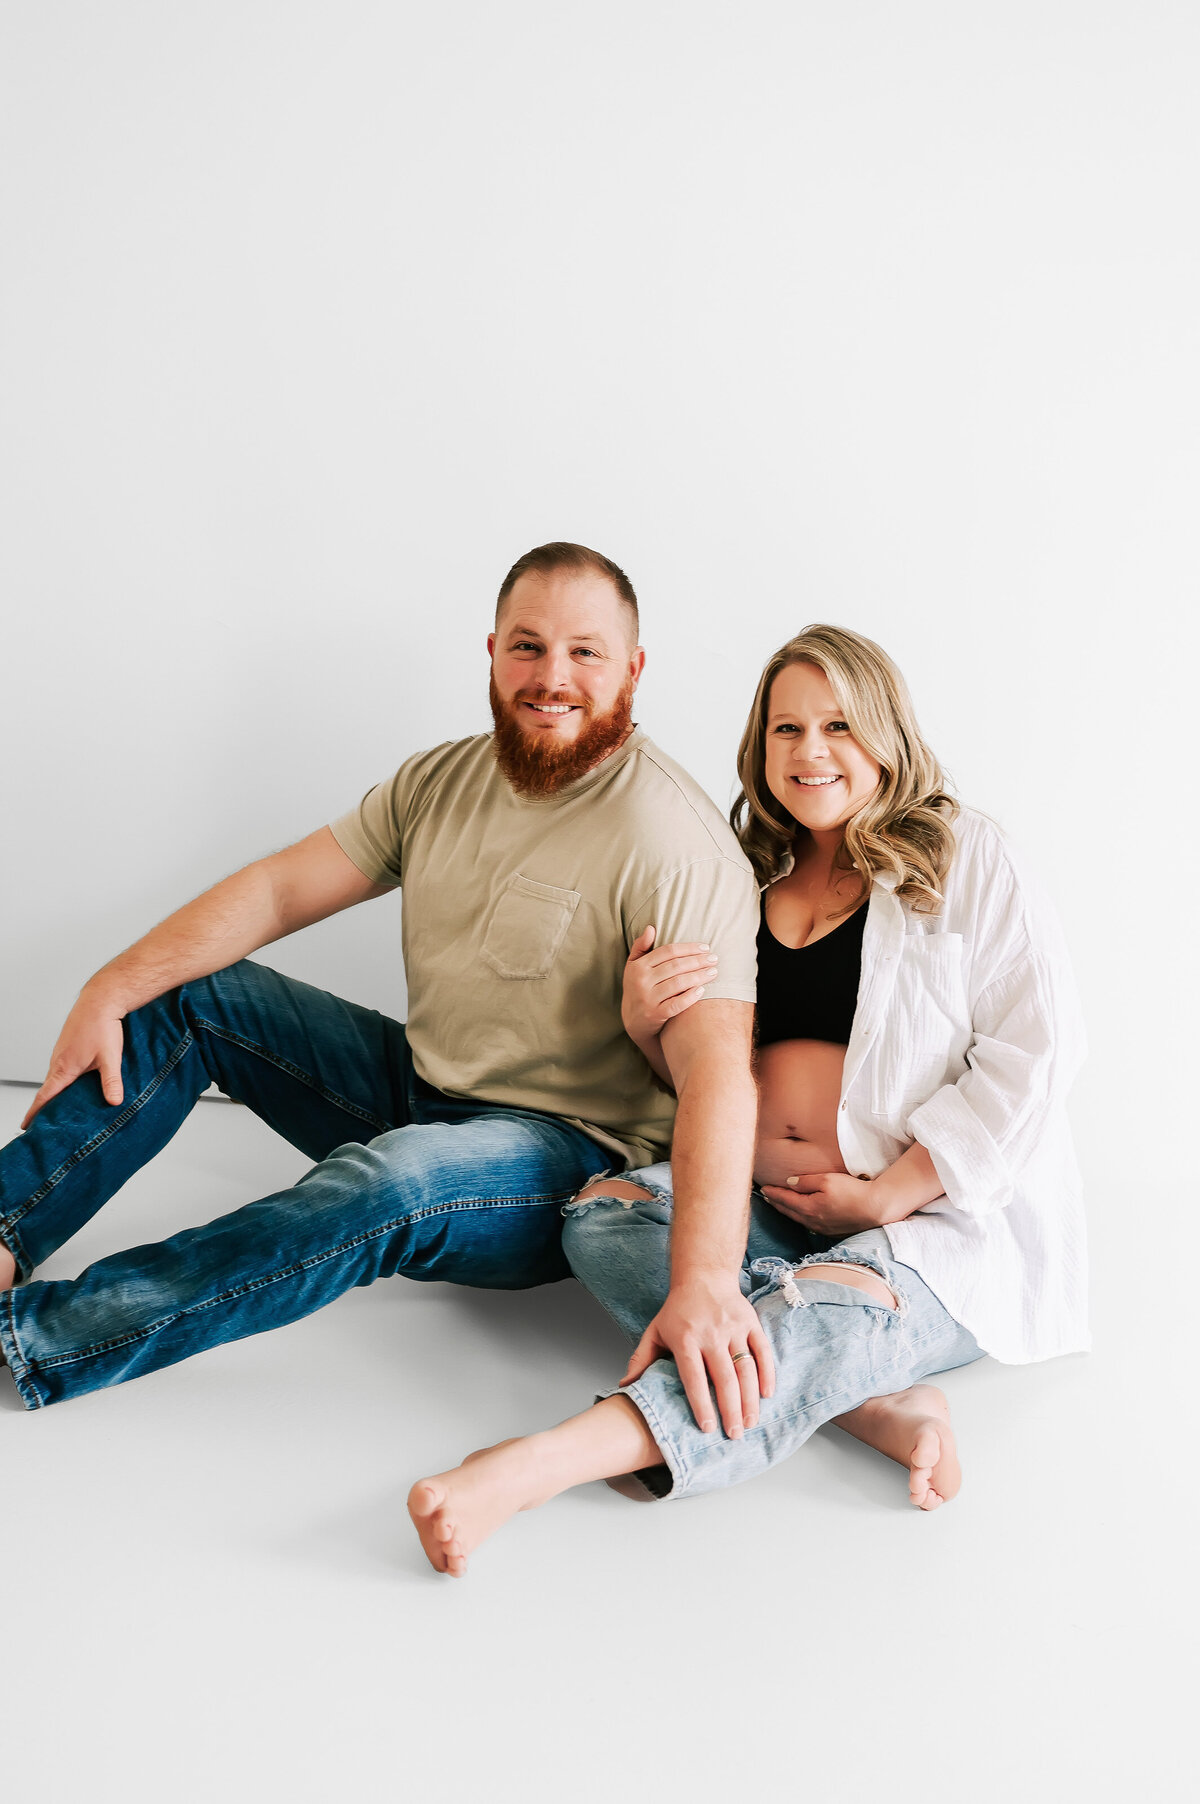 husband and wife sitting on ground smiling holding pregnant belly enjoying maternity pictures in Springfield MO